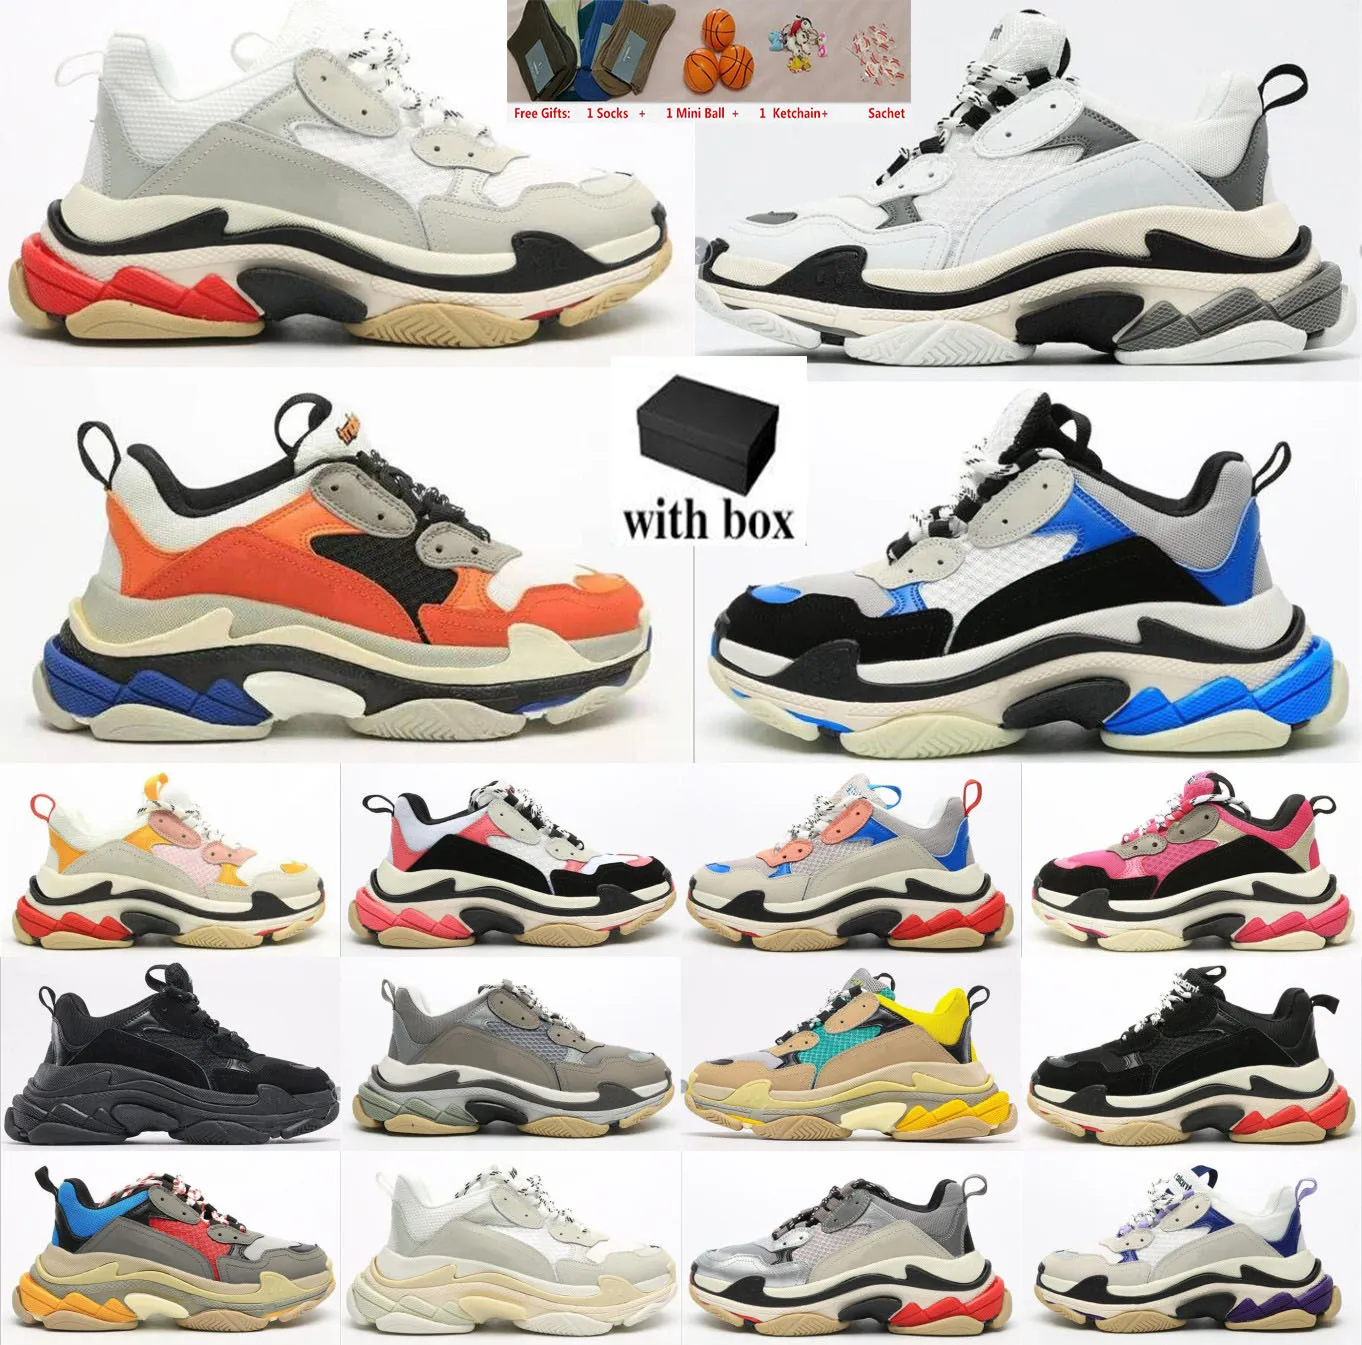 Triple S Men Women Designer Casual Shoes Platform Sneakers 17fw Clear Sole Black White Gray Red Pink Blue Royal Green Mens Trainers Jogging Walking with Box 36-45